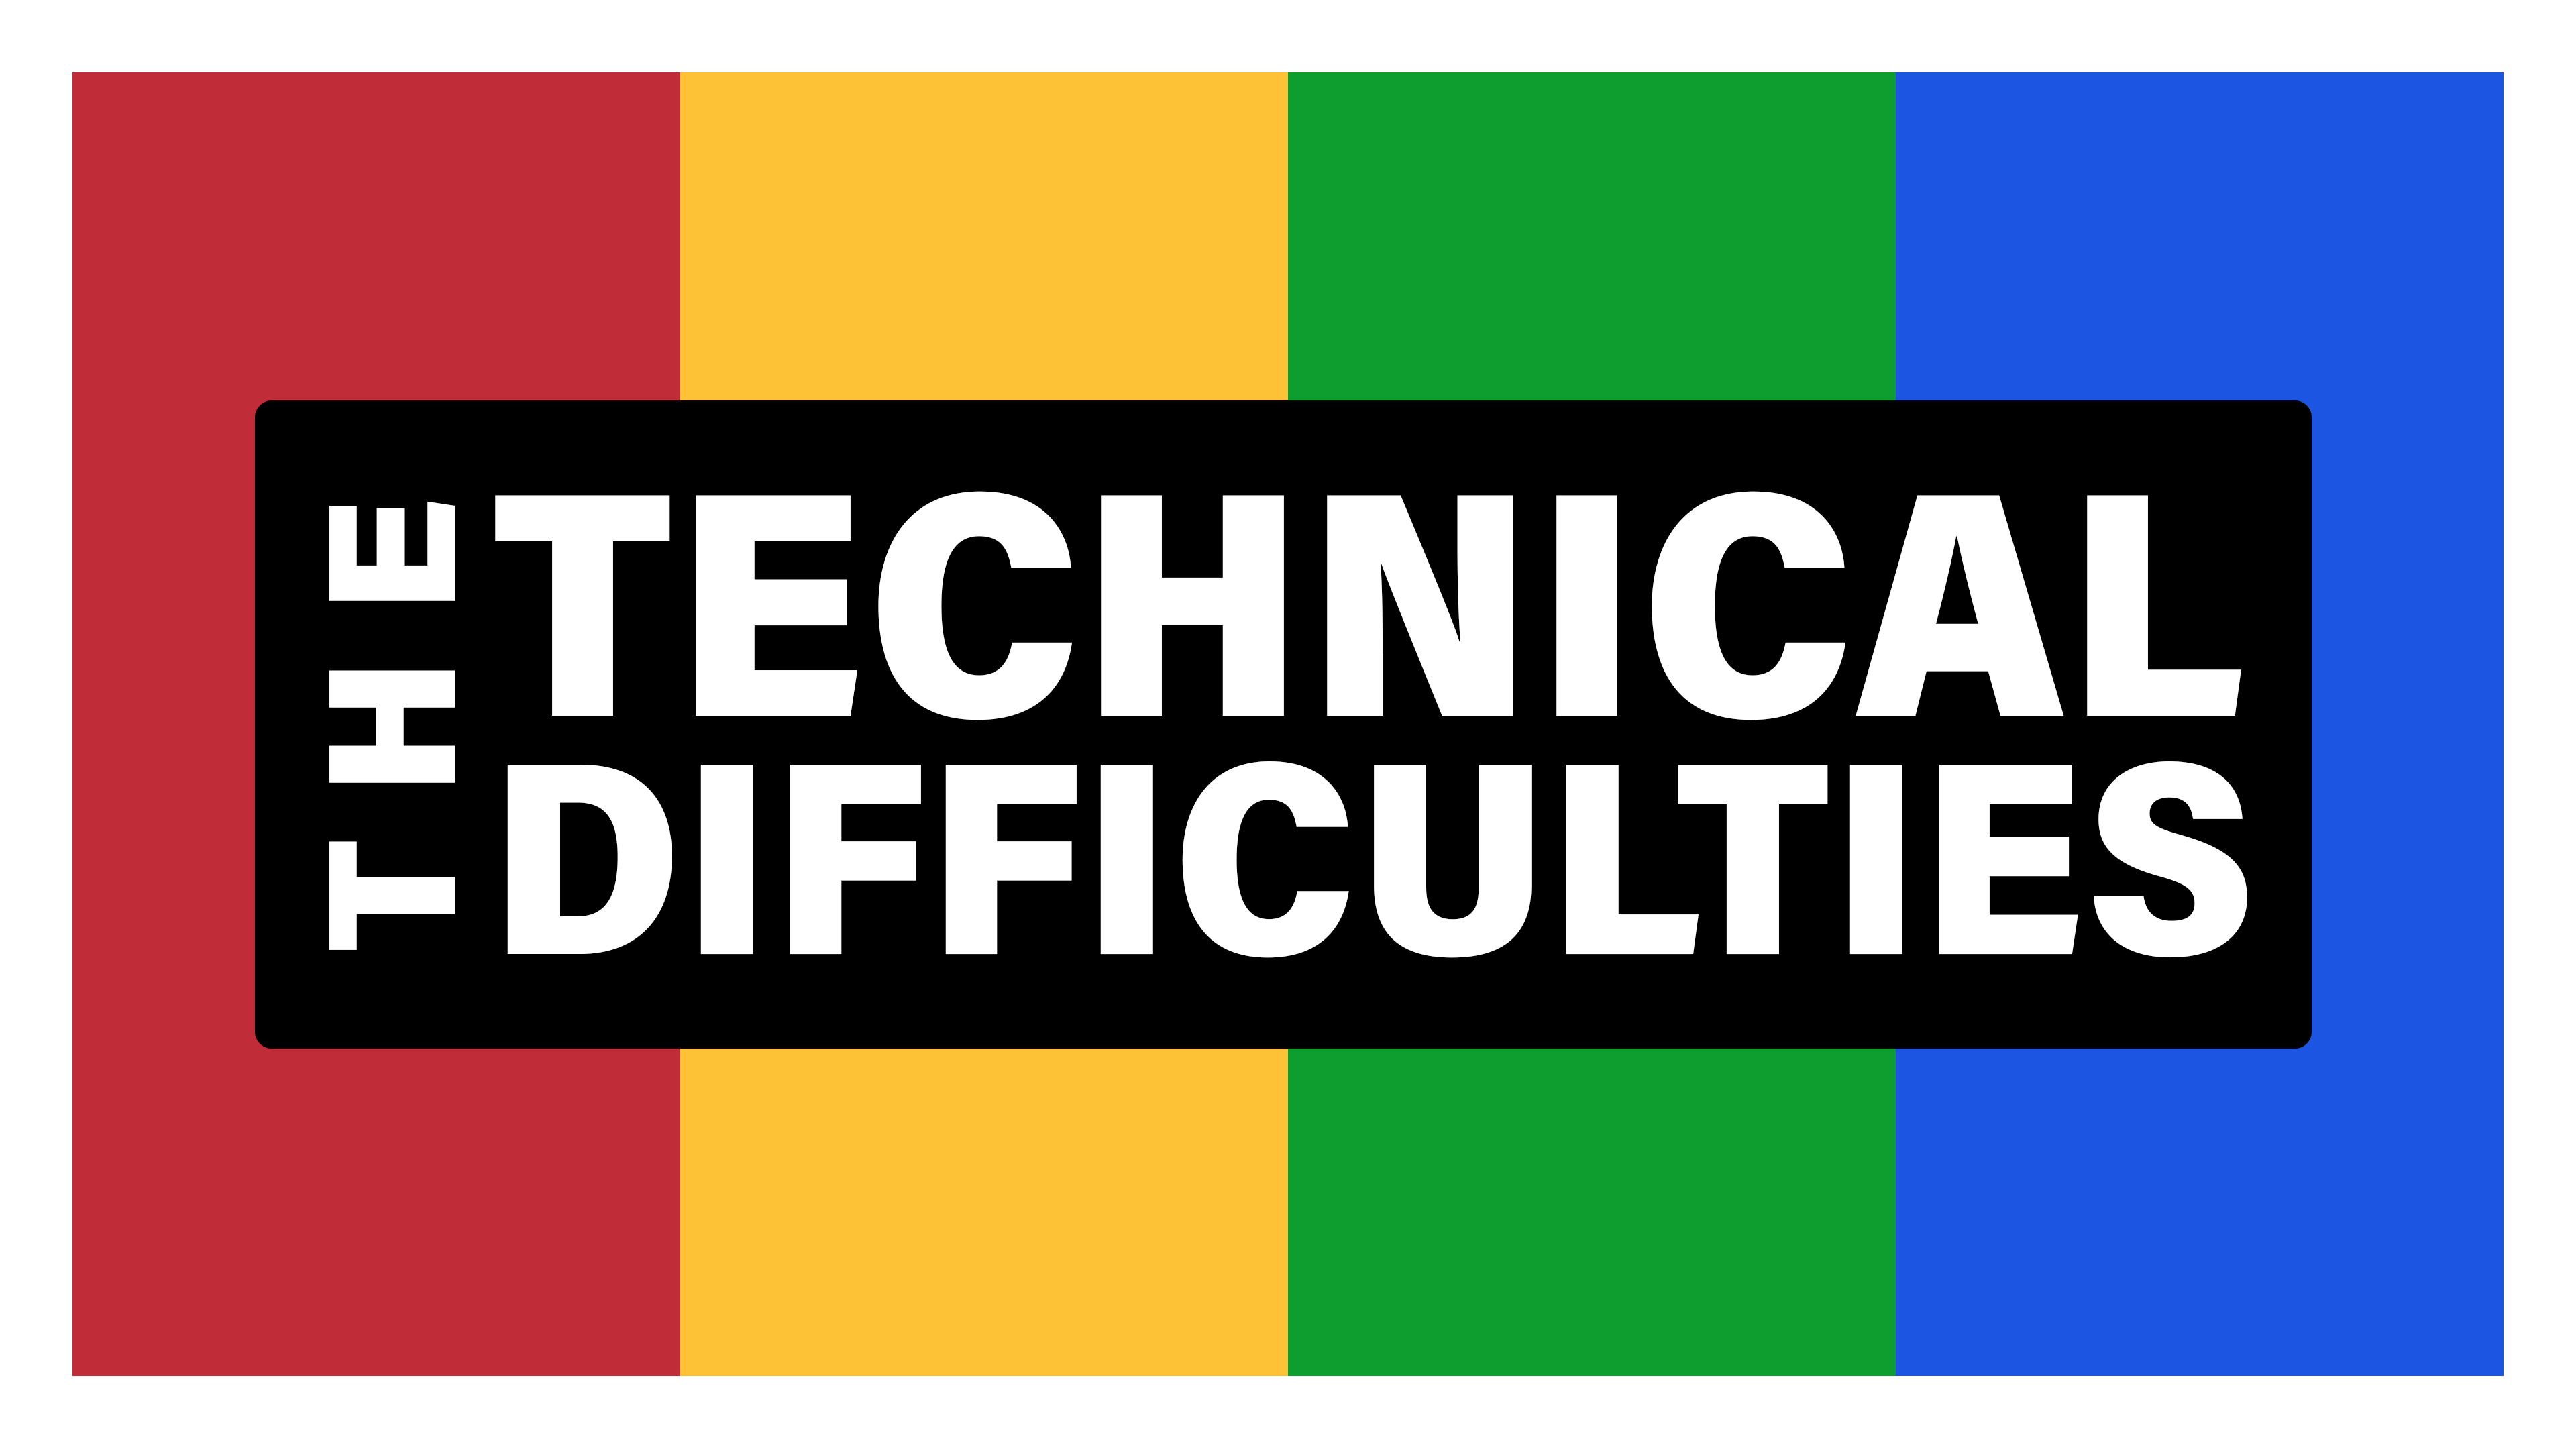 The Technical Difficulties Logo